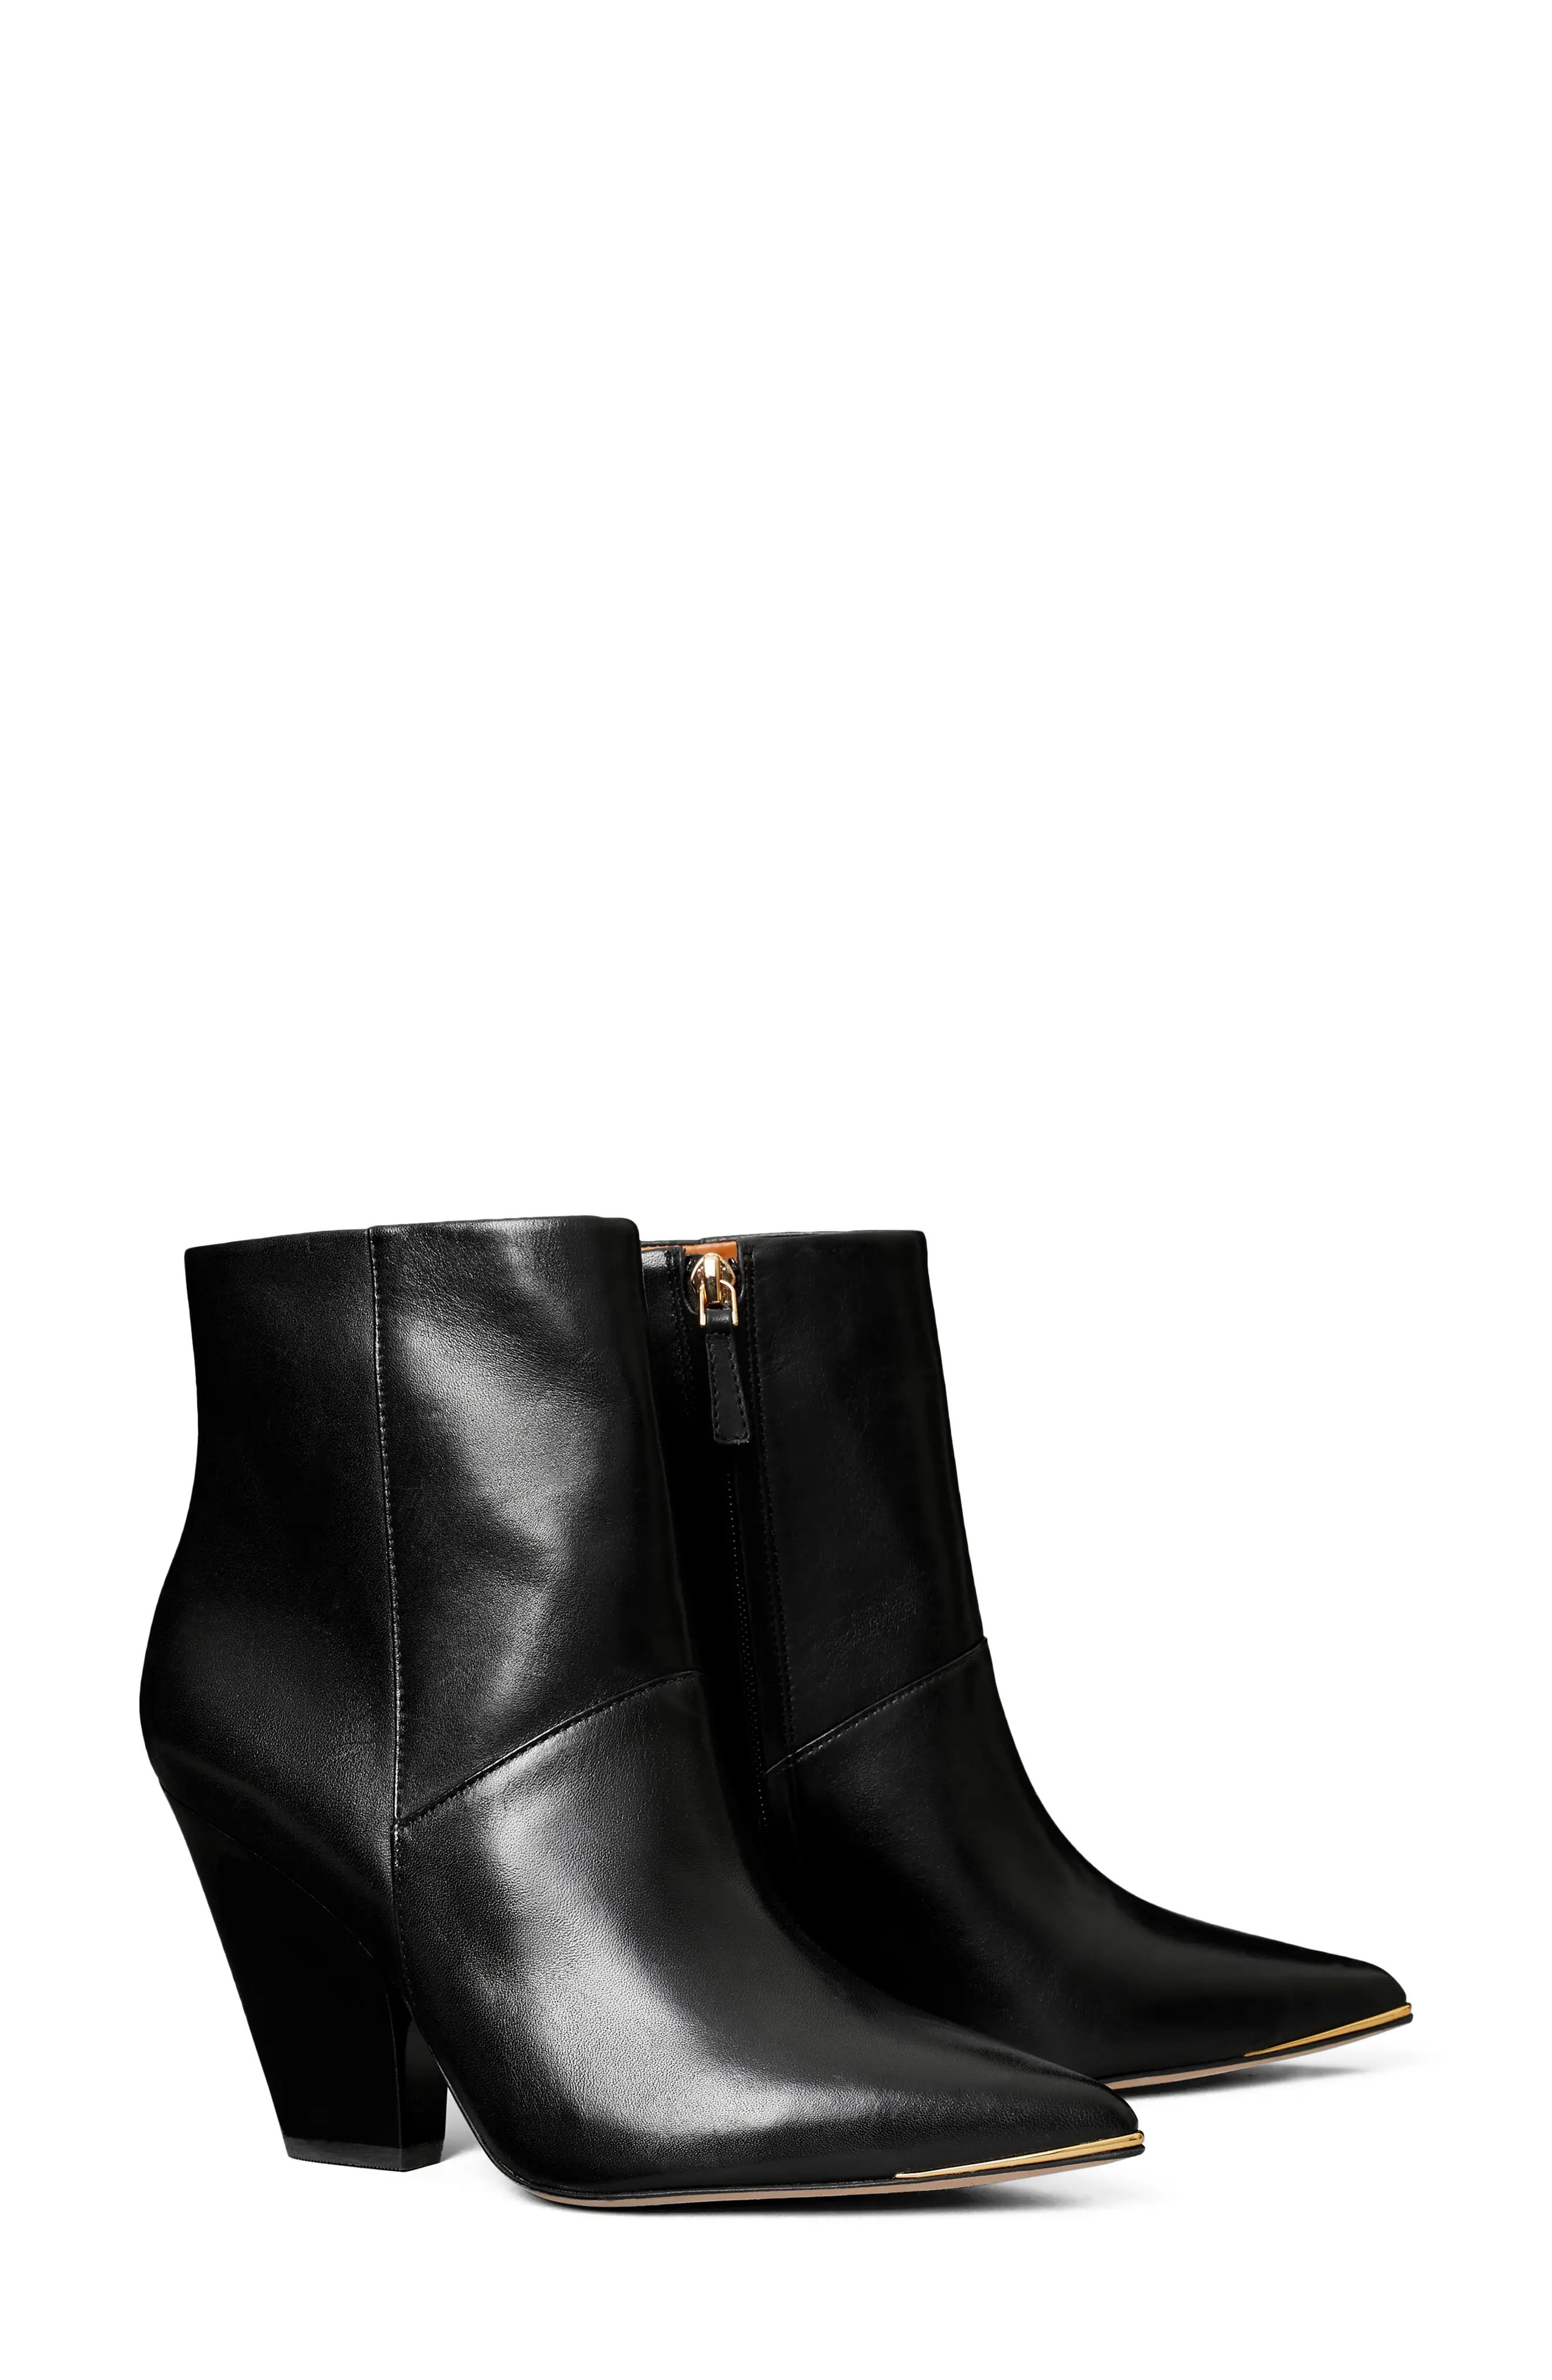 Tory Burch Lila Pointed Toe Bootie, Size 9.5 in Perfect Black at Nordstrom | Nordstrom